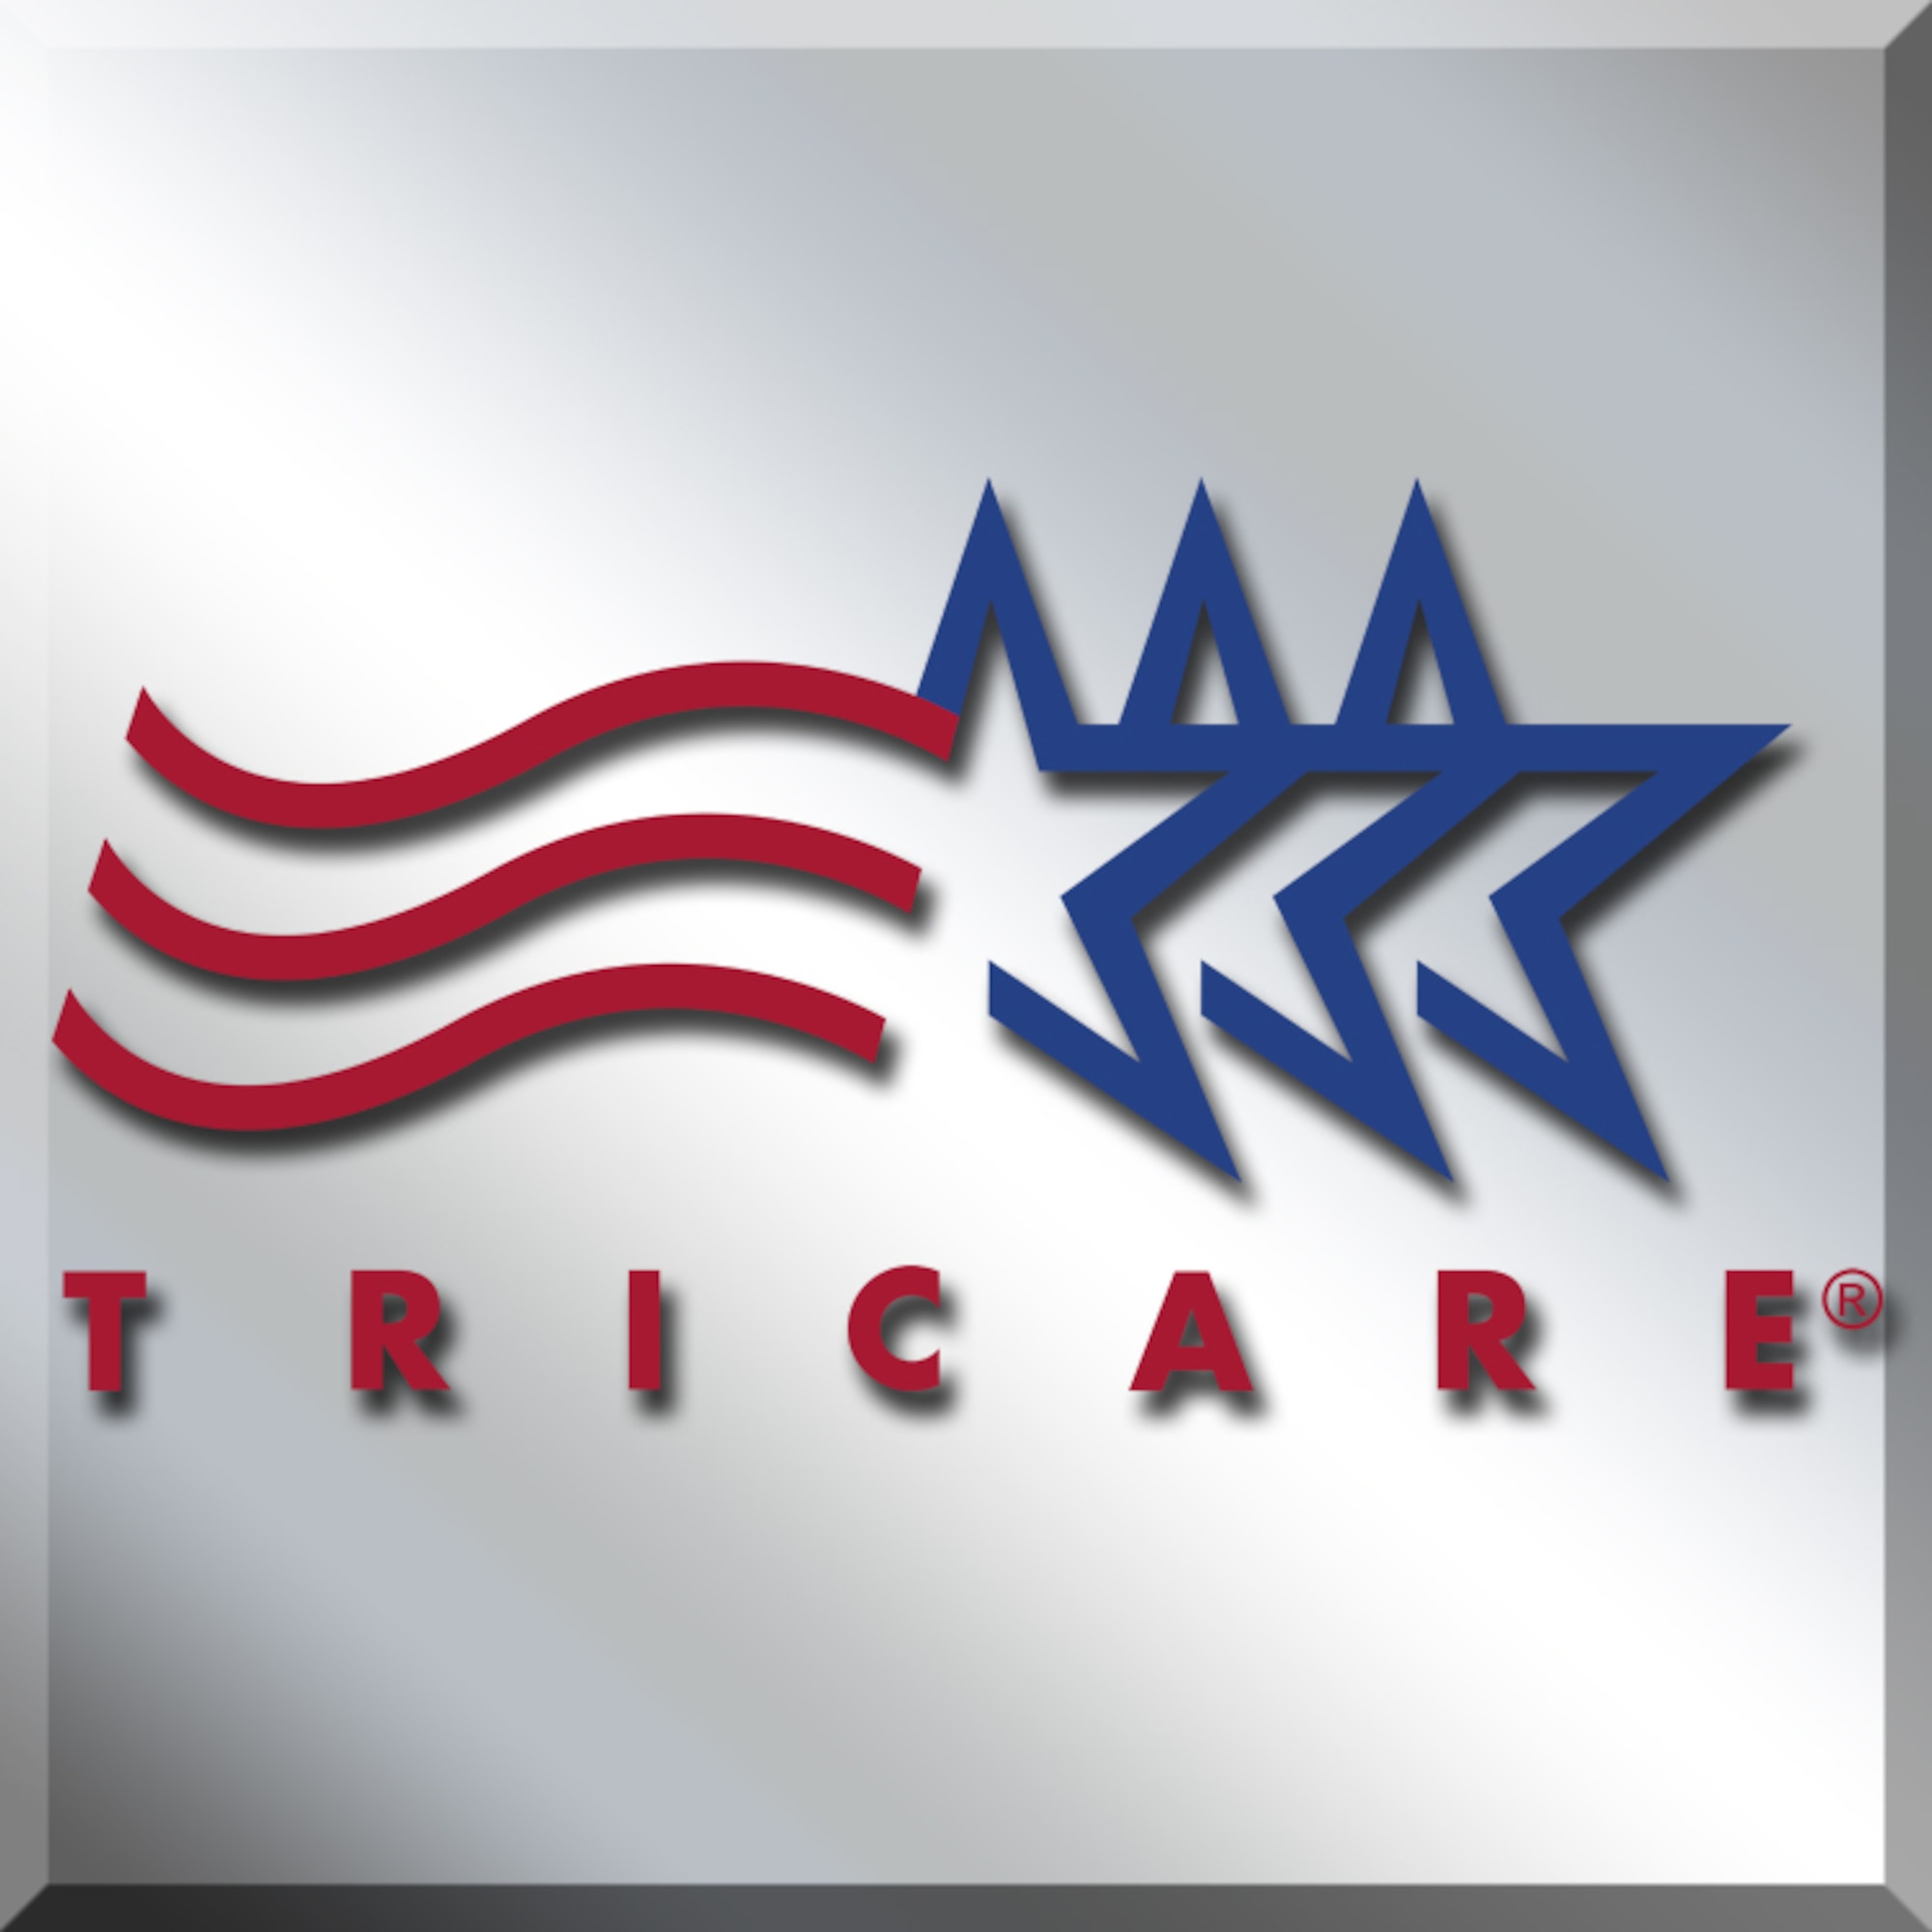 TRICARE has recently replaced select, multi-page, beneficiary notification letters with simple postcards to preserve resources and protect sensitive patient information. In addition to eliminating the presence of private patient information, like social security numbers, the postcards redirect members to informative websites and phone numbers. (Courtesy graphic/Released)